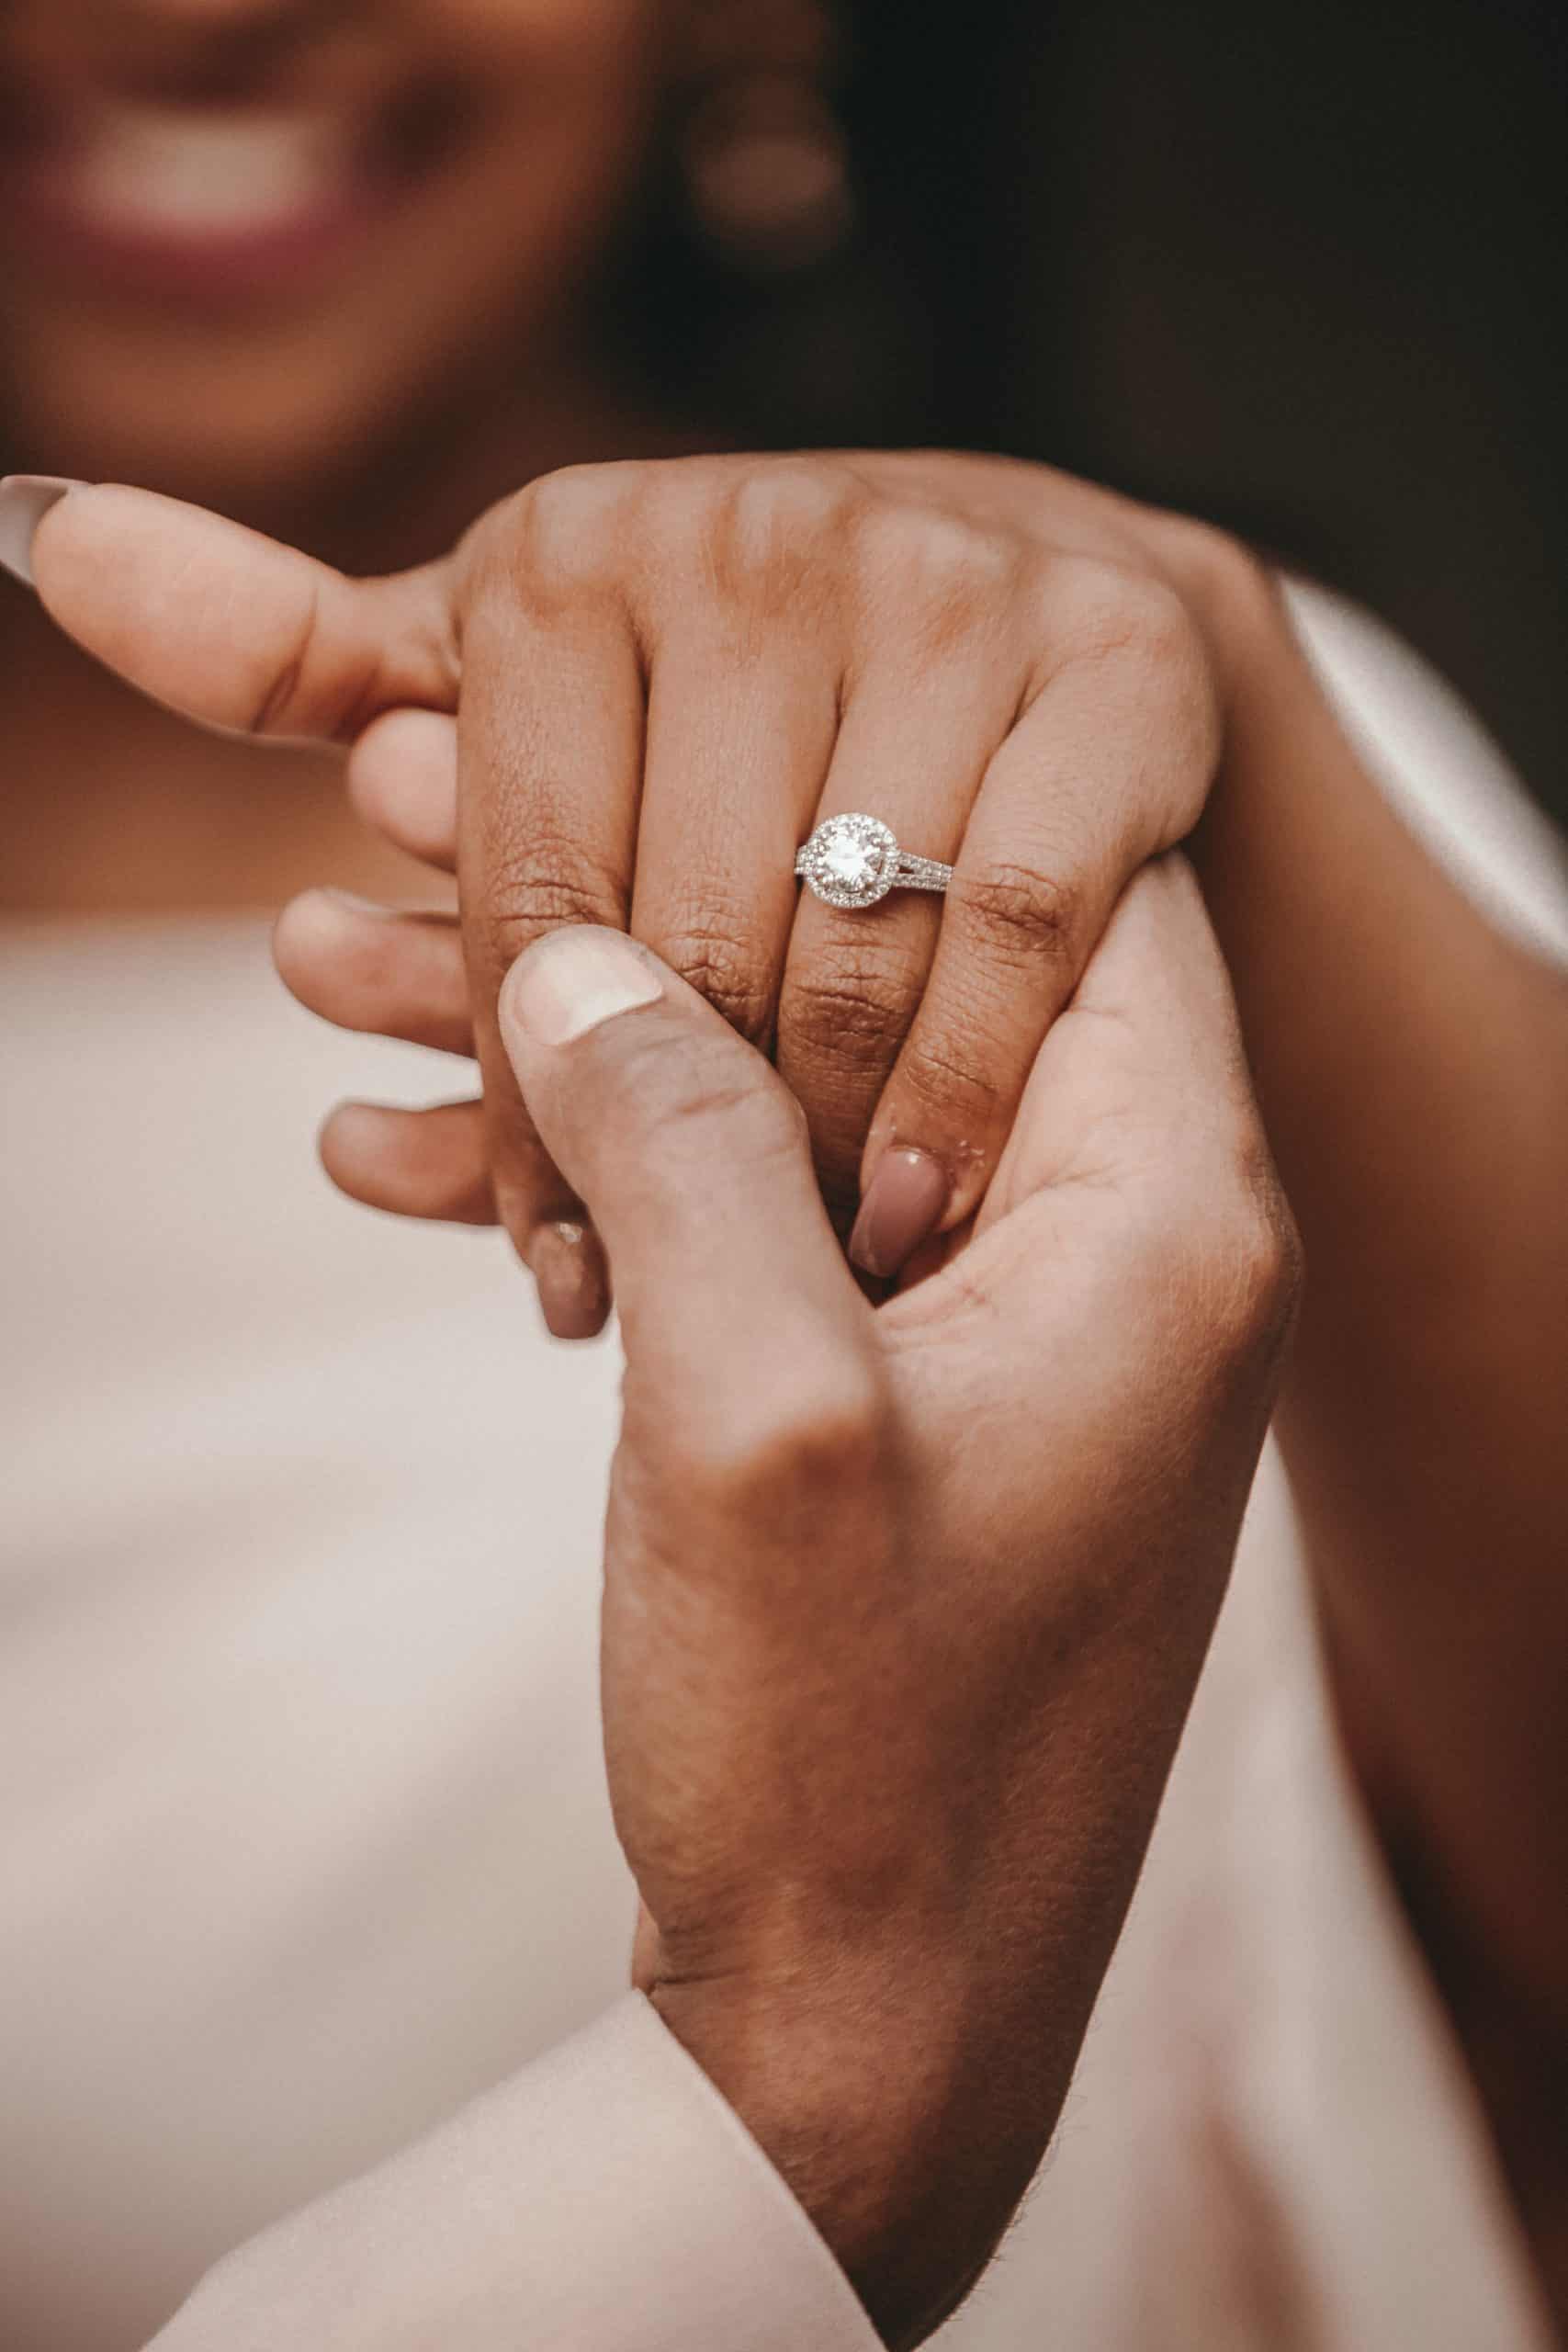 How Do You Wear Your Wedding & Engagement Rings - Anania Family